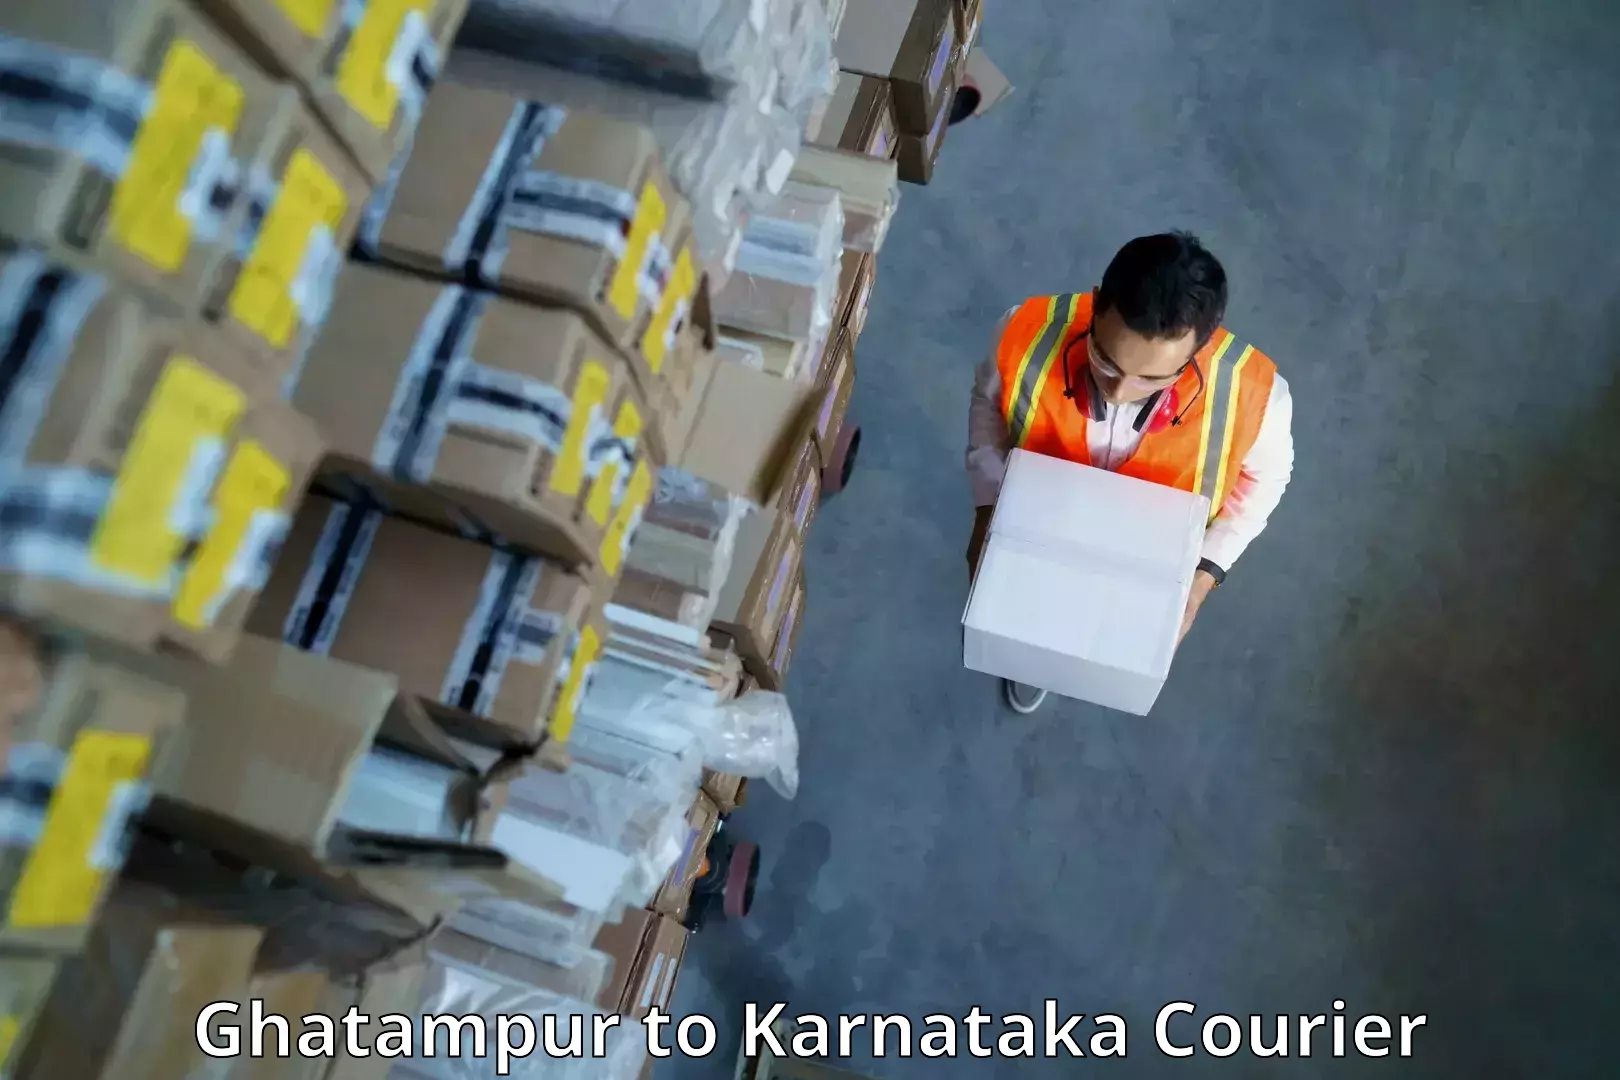 State-of-the-art courier technology Ghatampur to Karnataka